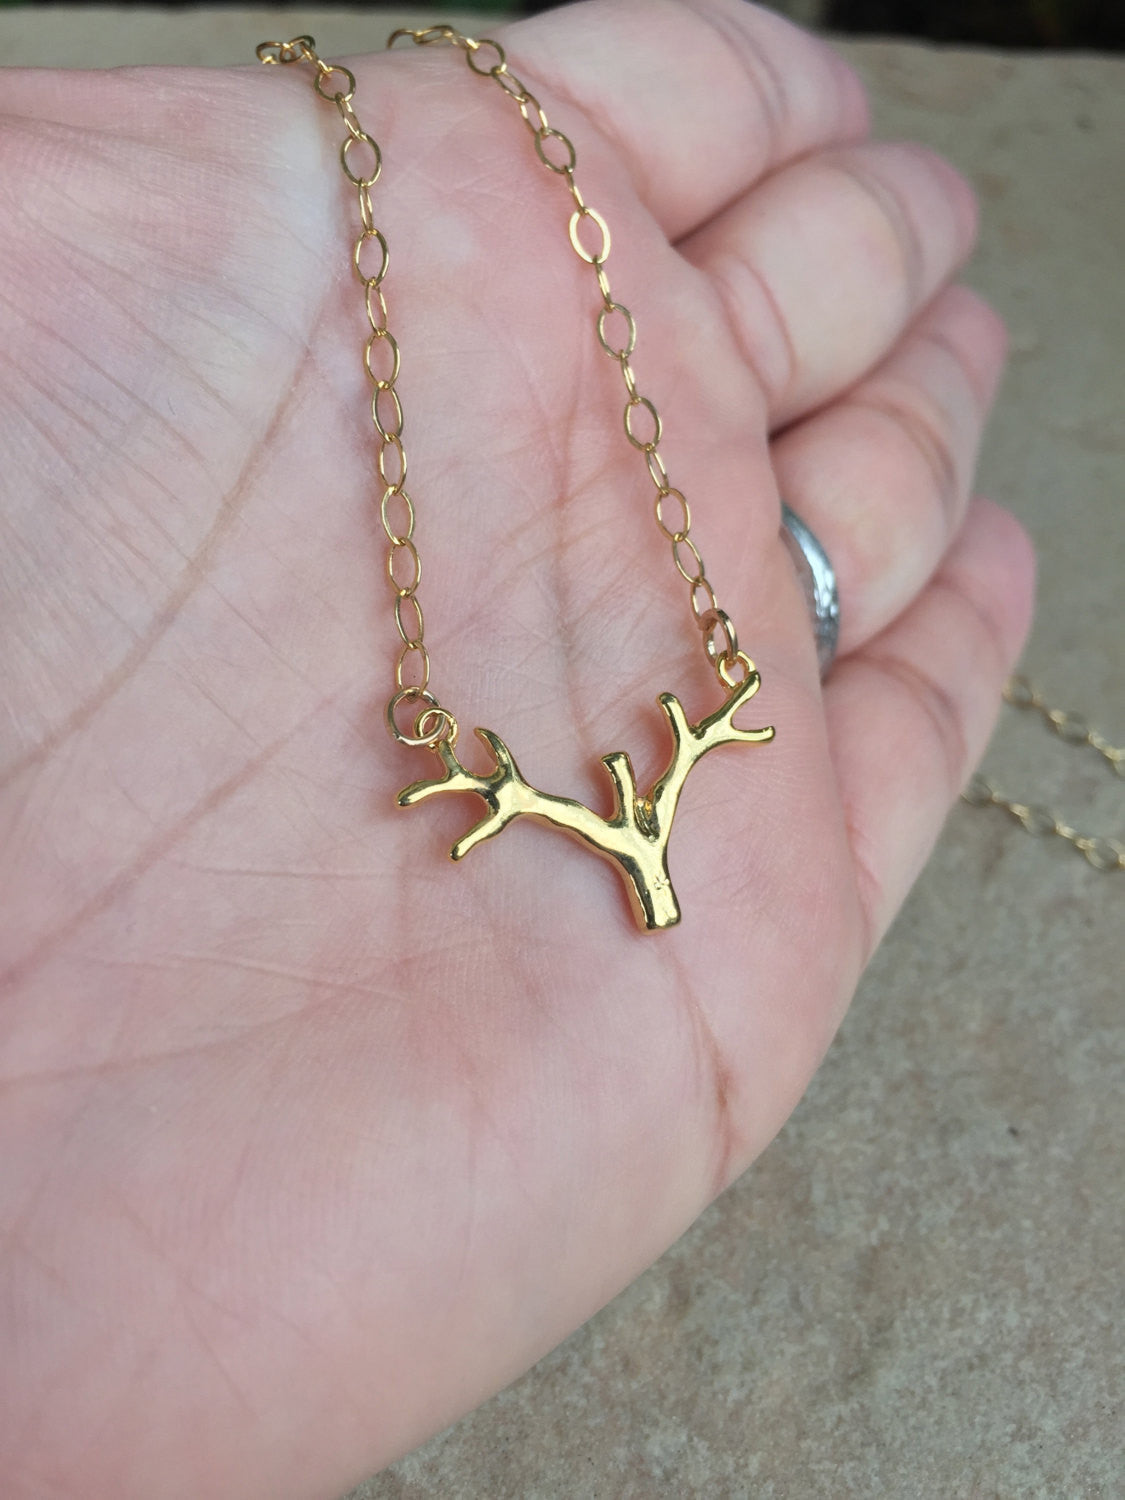 Gold Antler Necklace, Minimal Jewelry, Necklace, Natashaaloha - Natashaaloha, jewelry, bracelets, necklace, keychains, fishing lures, gifts for men, charms, personalized, 